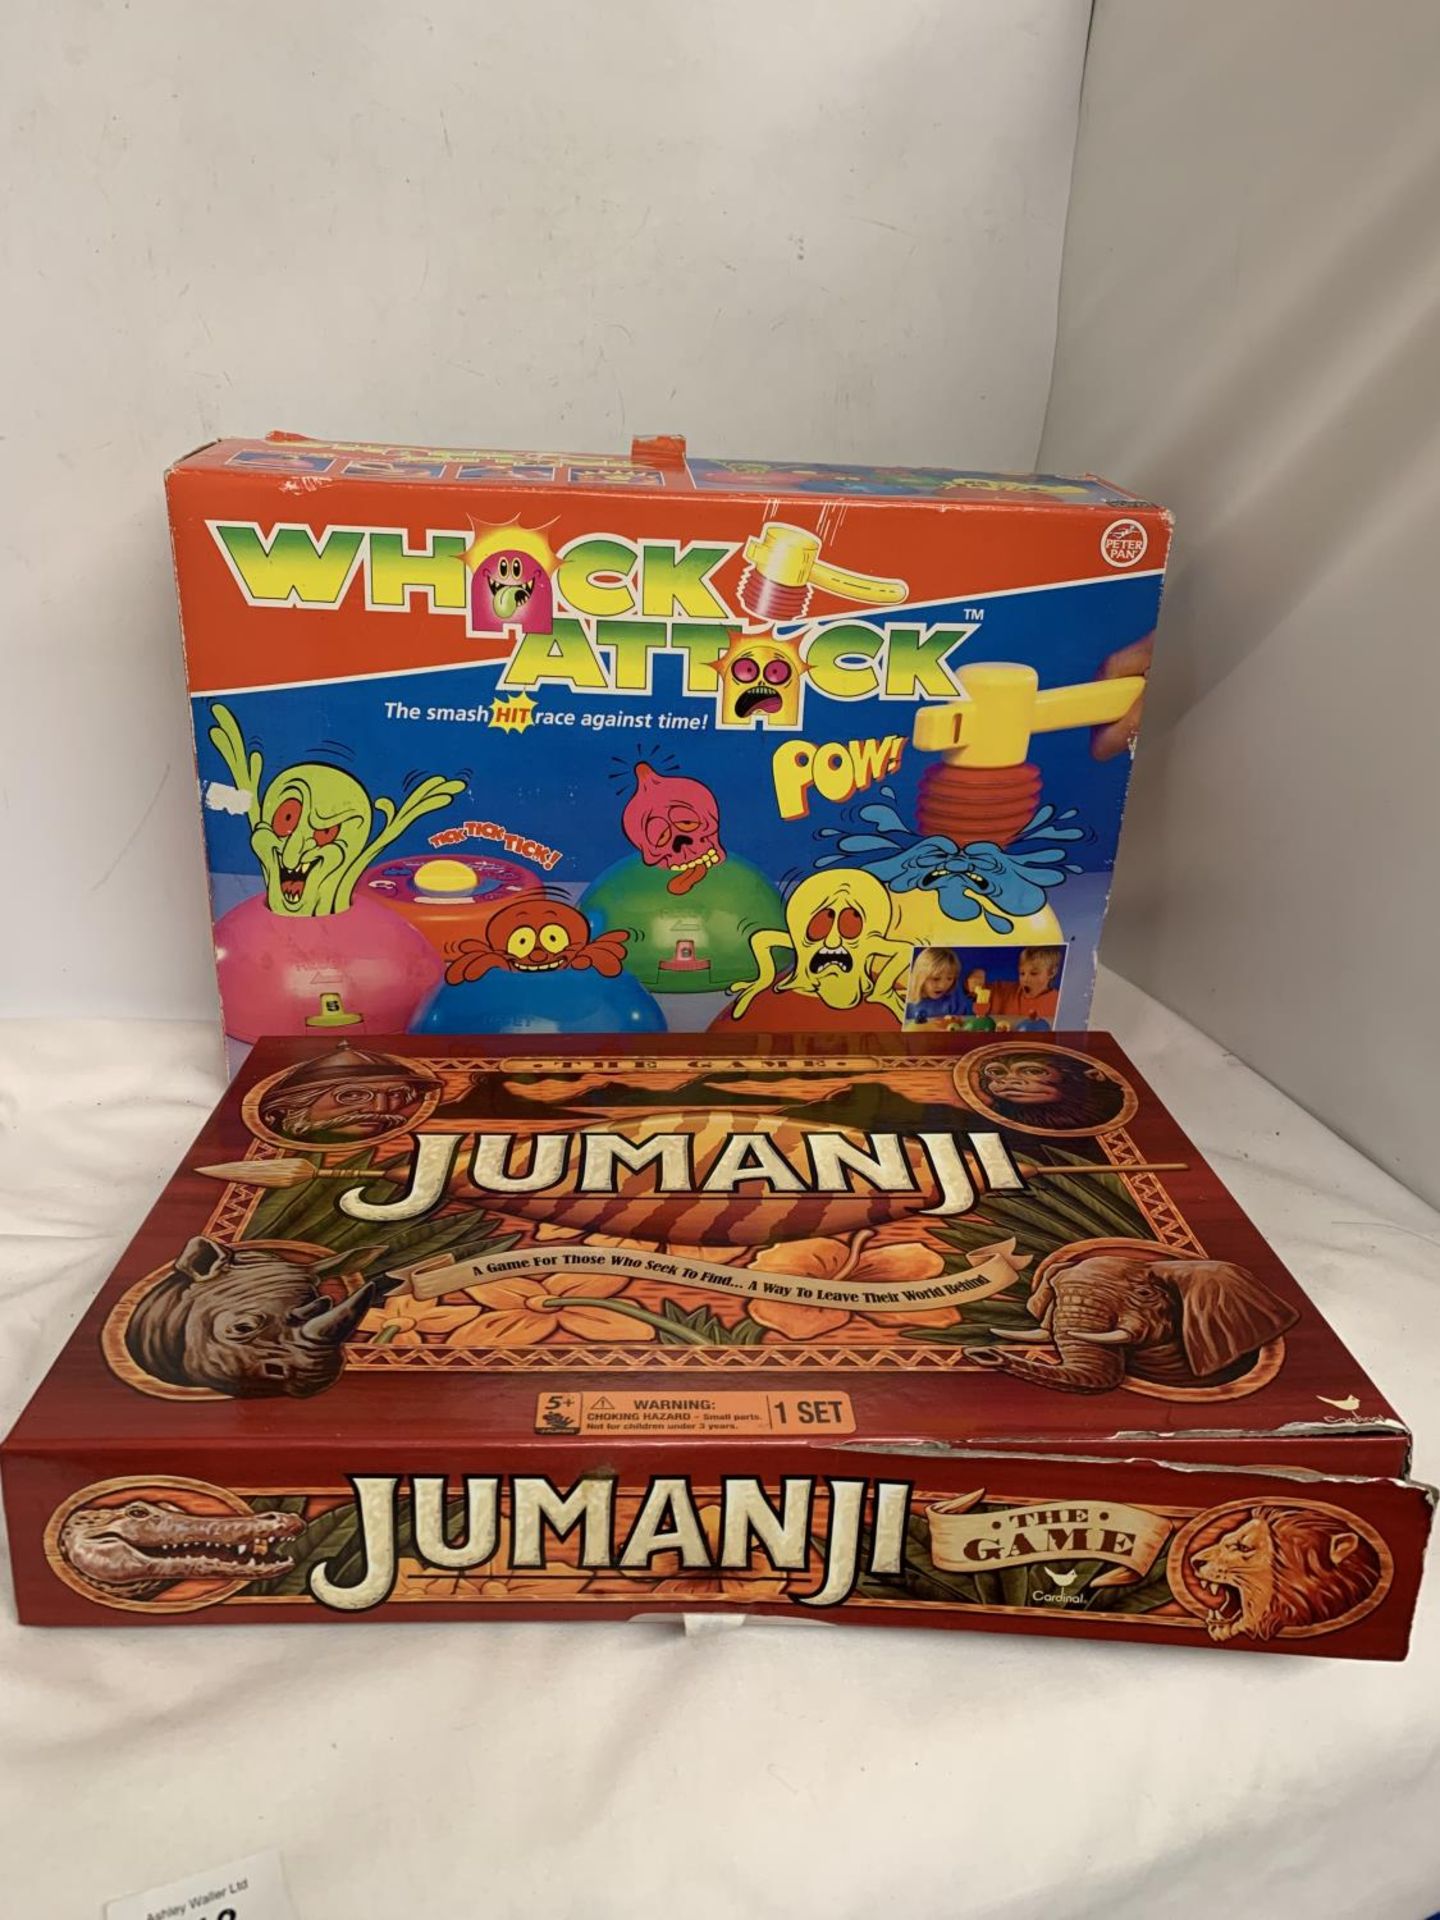 A JUMANJI GAME TOGETHER WITH A FURTHER GAME WHACK ATTACK